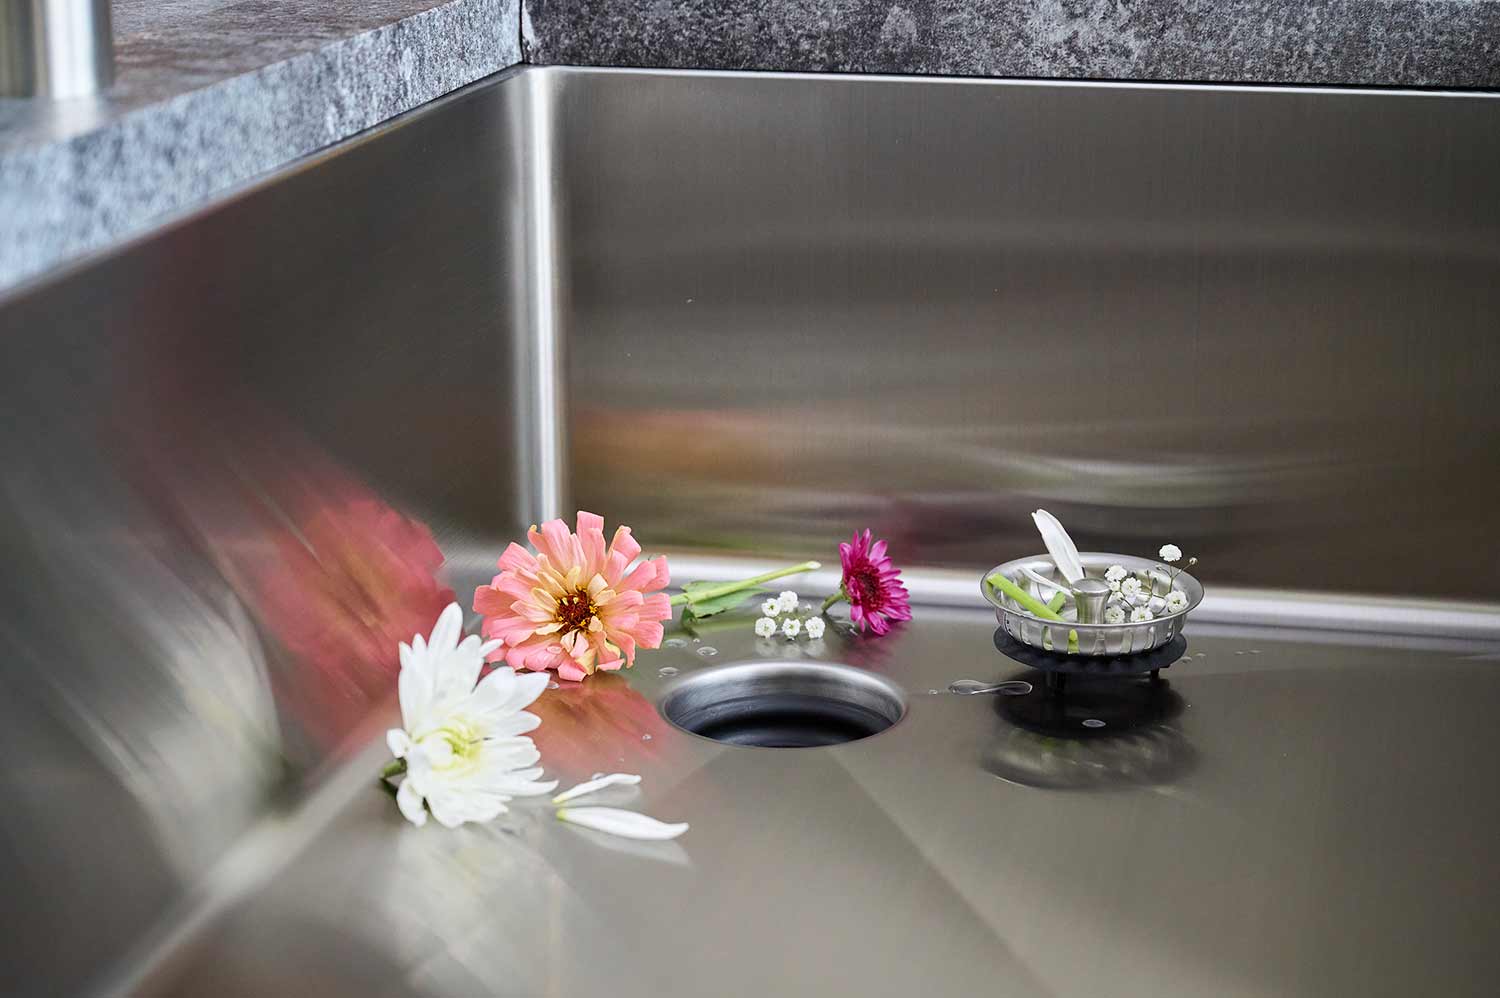 Stainless steel kitchen sink with offset corner drain and patented seamless drain feature